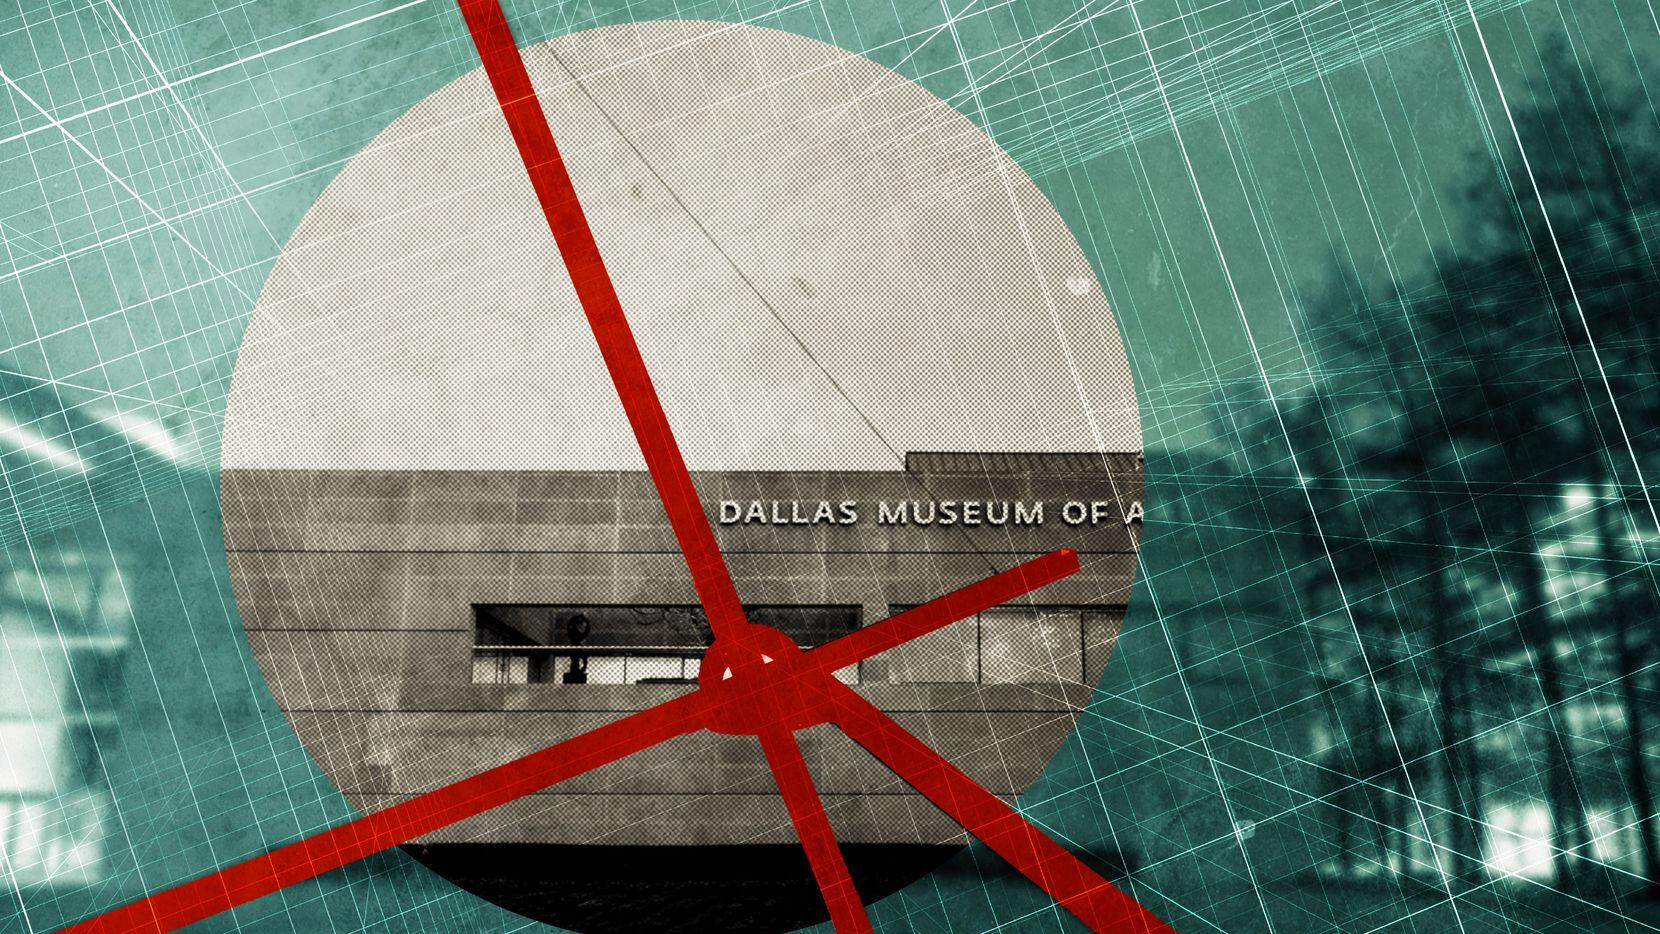 It's up to the architects and the public to ensure that the Dallas Museum of Art's expansion...